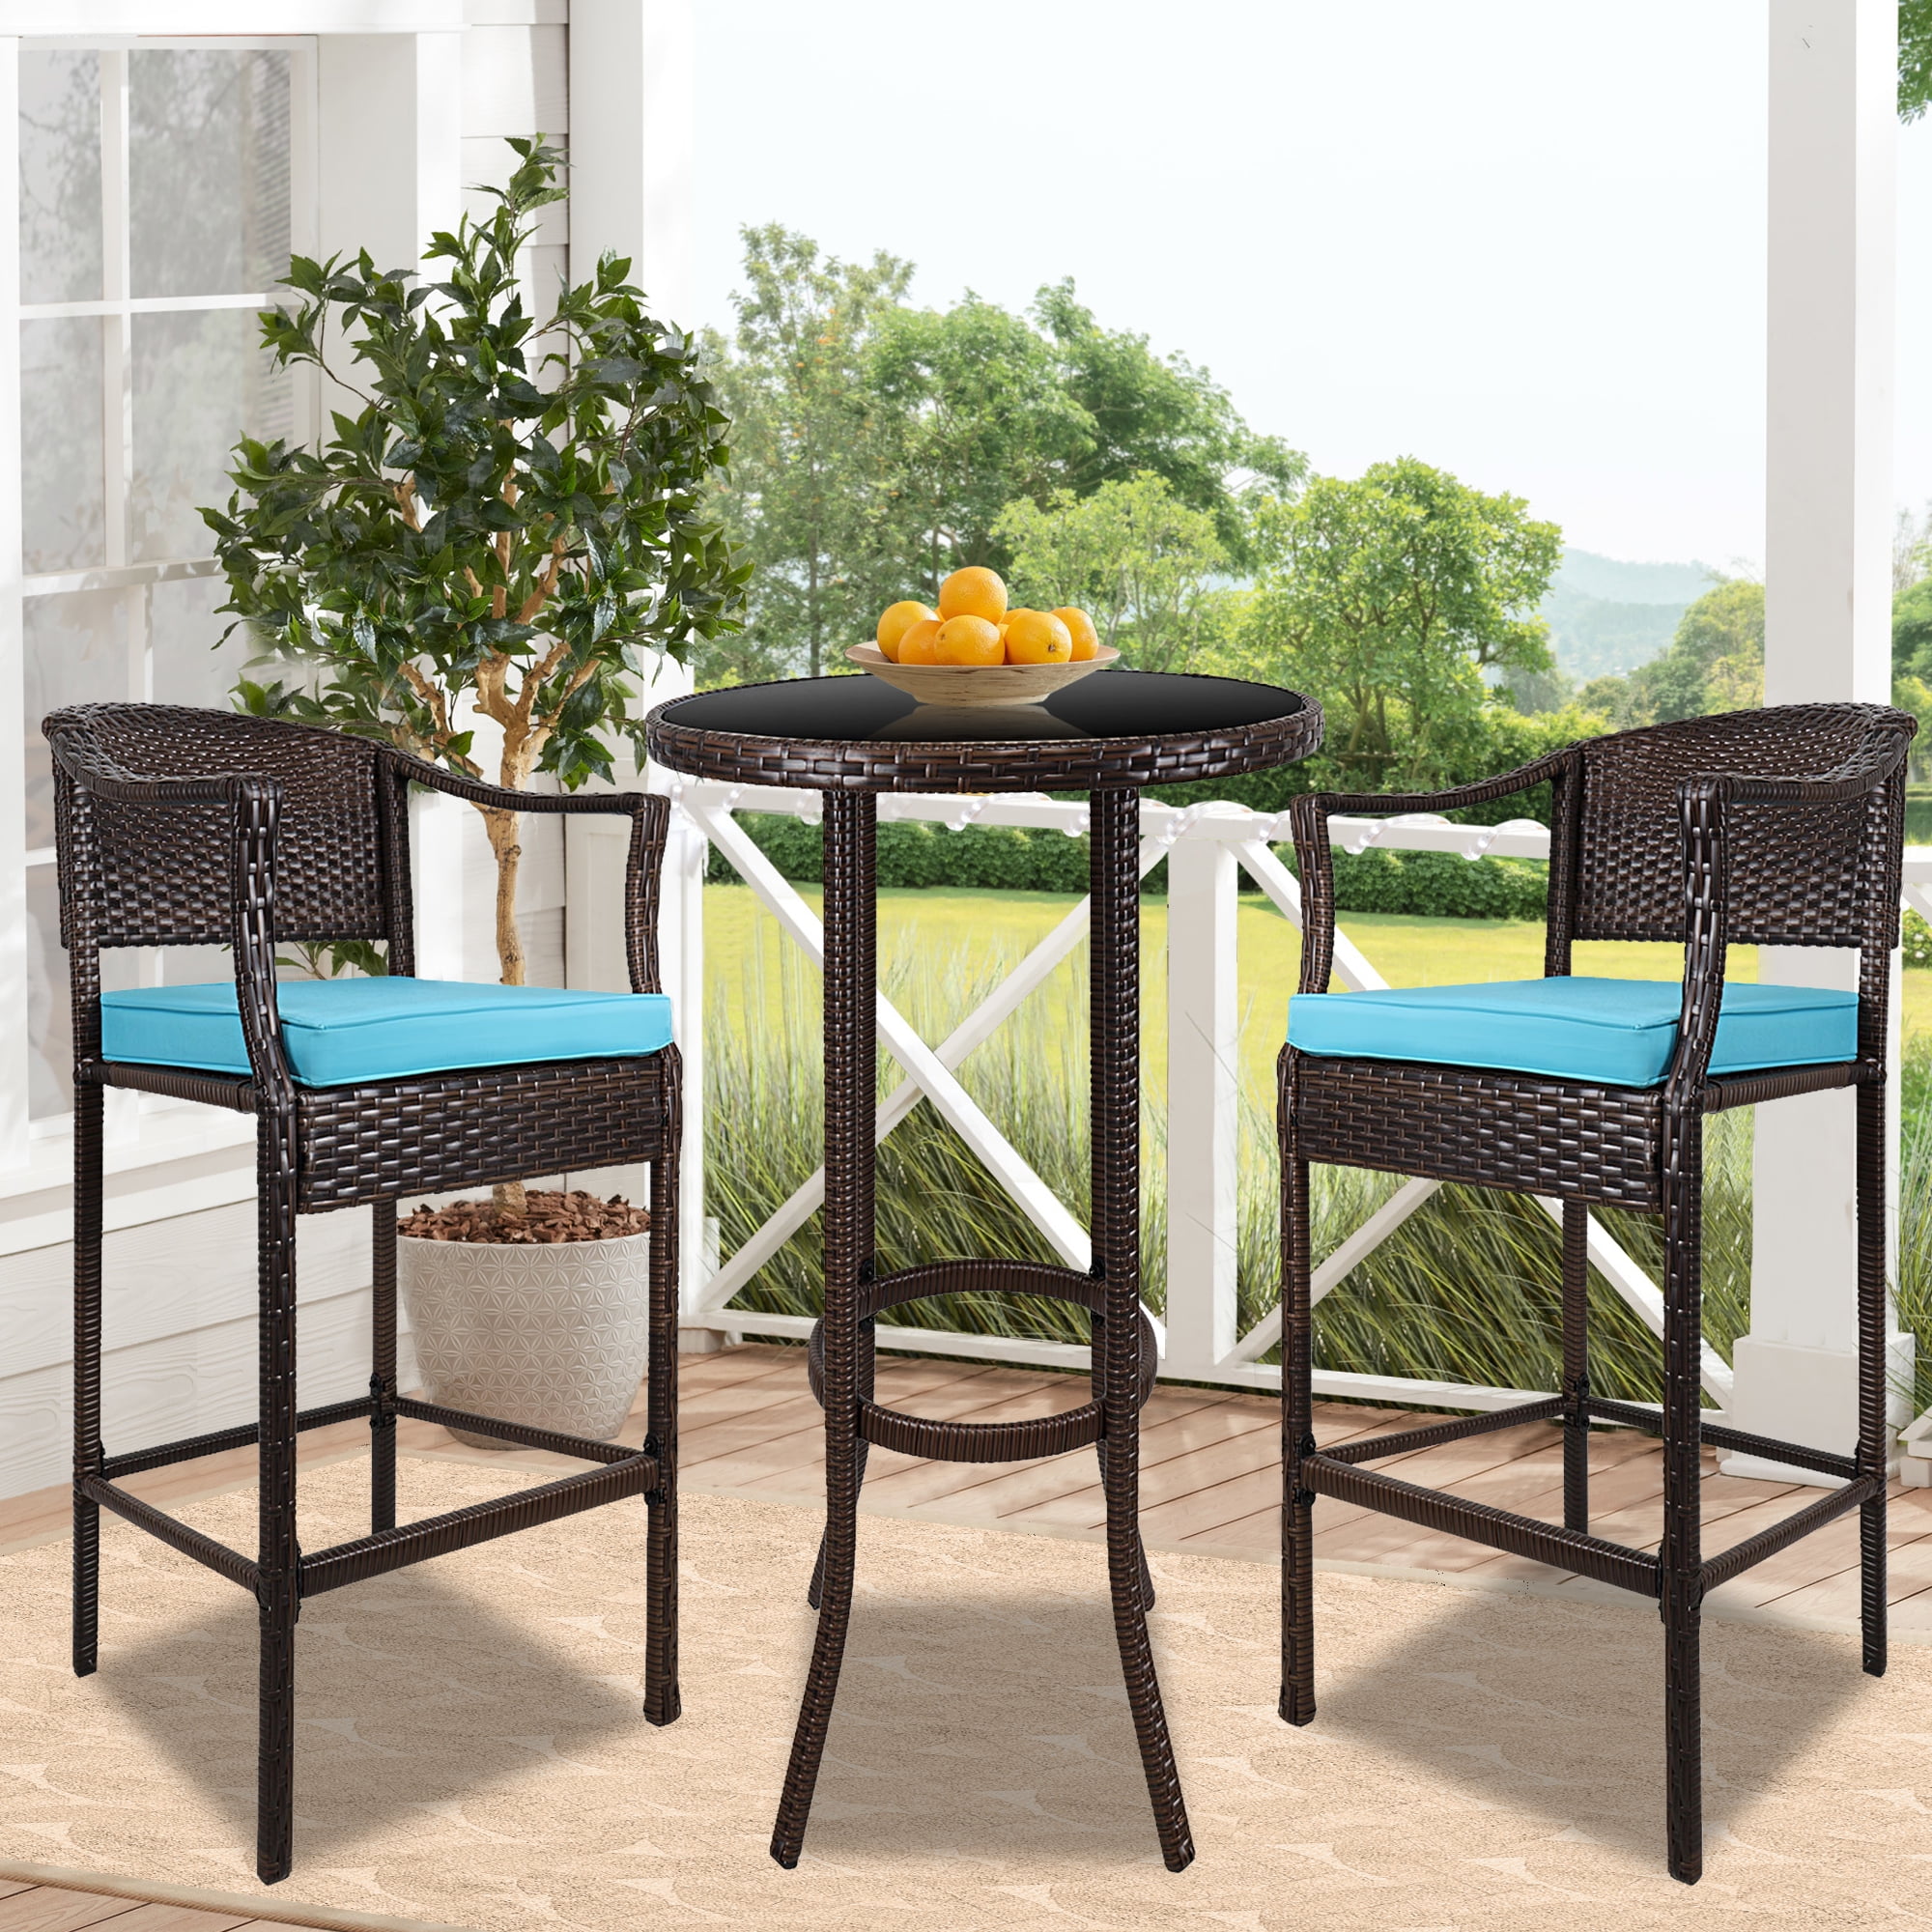 Chair Wicker Bar Height Bistro, Outdoor High Top Bistro Table And Chairs